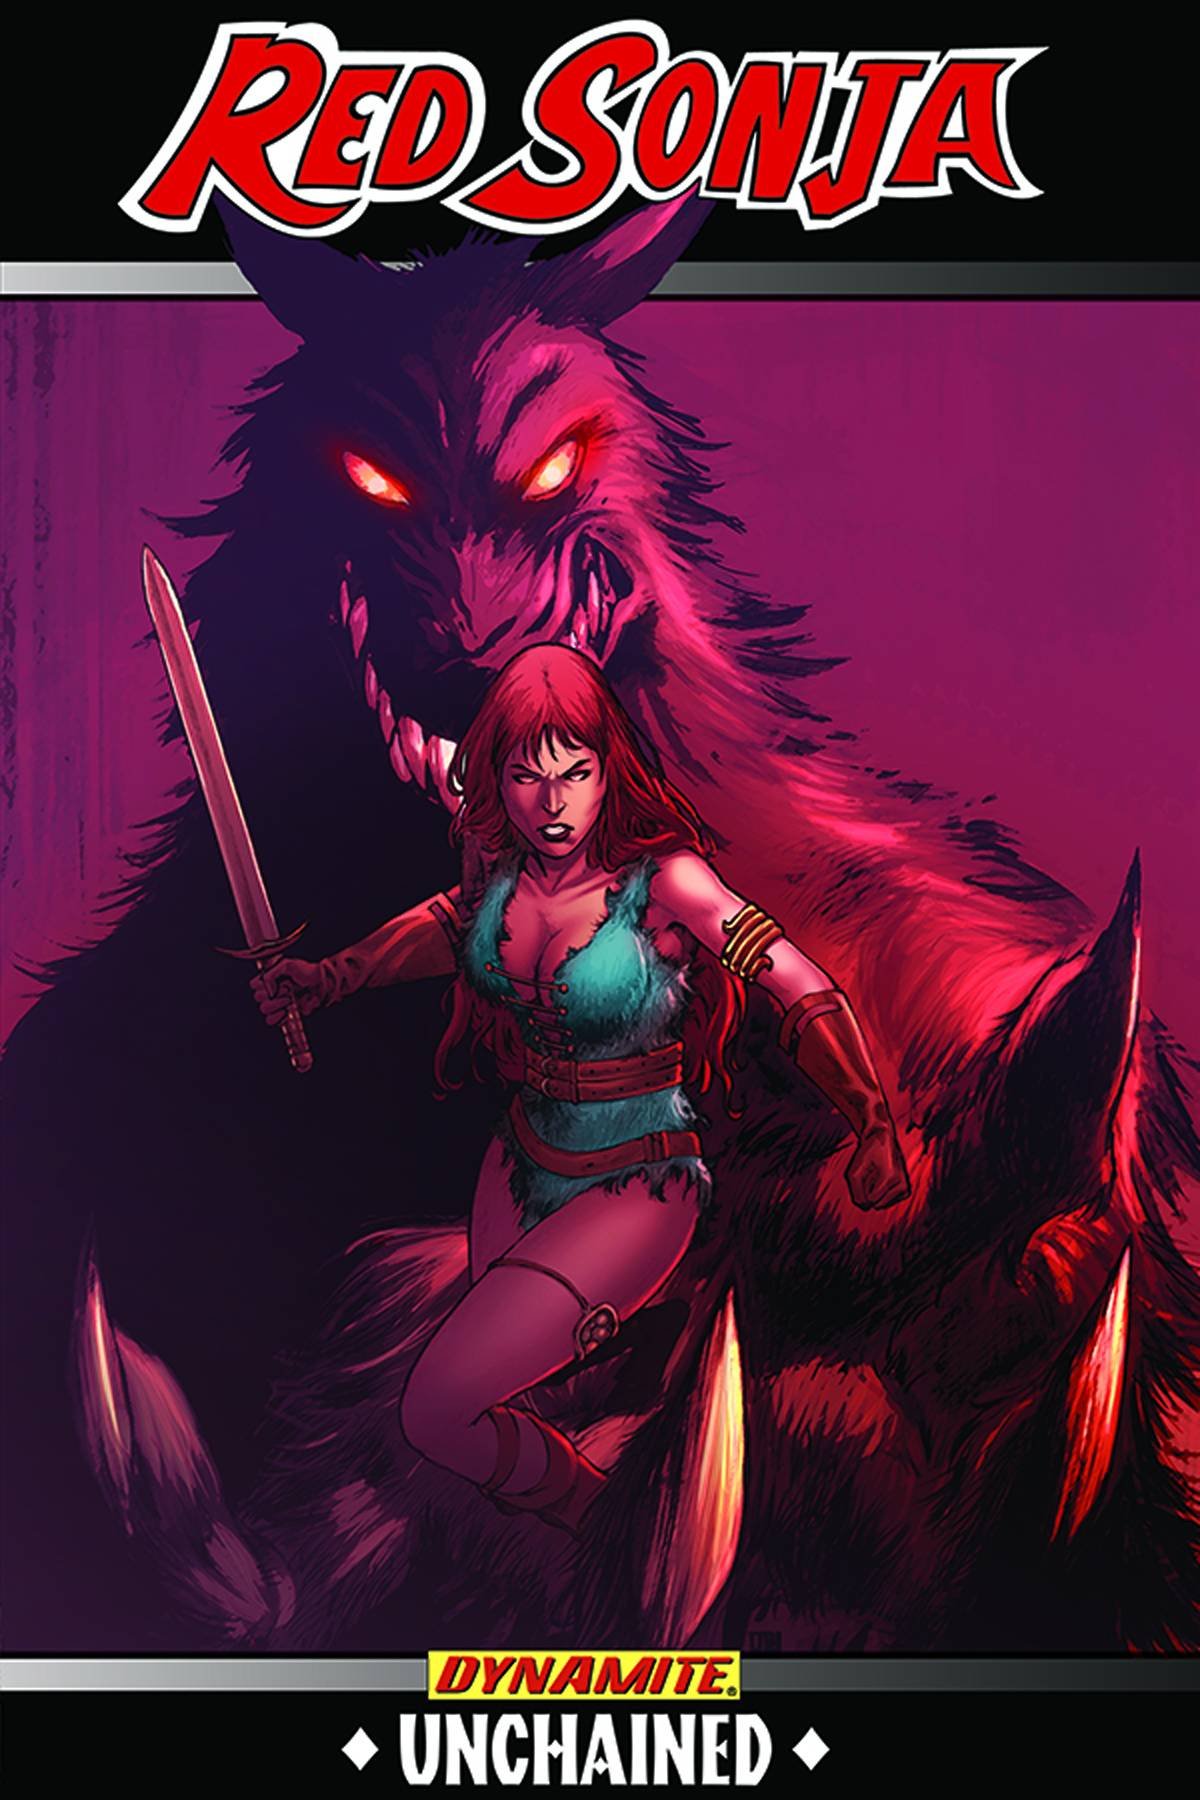 Red Sonja: Unchained #1